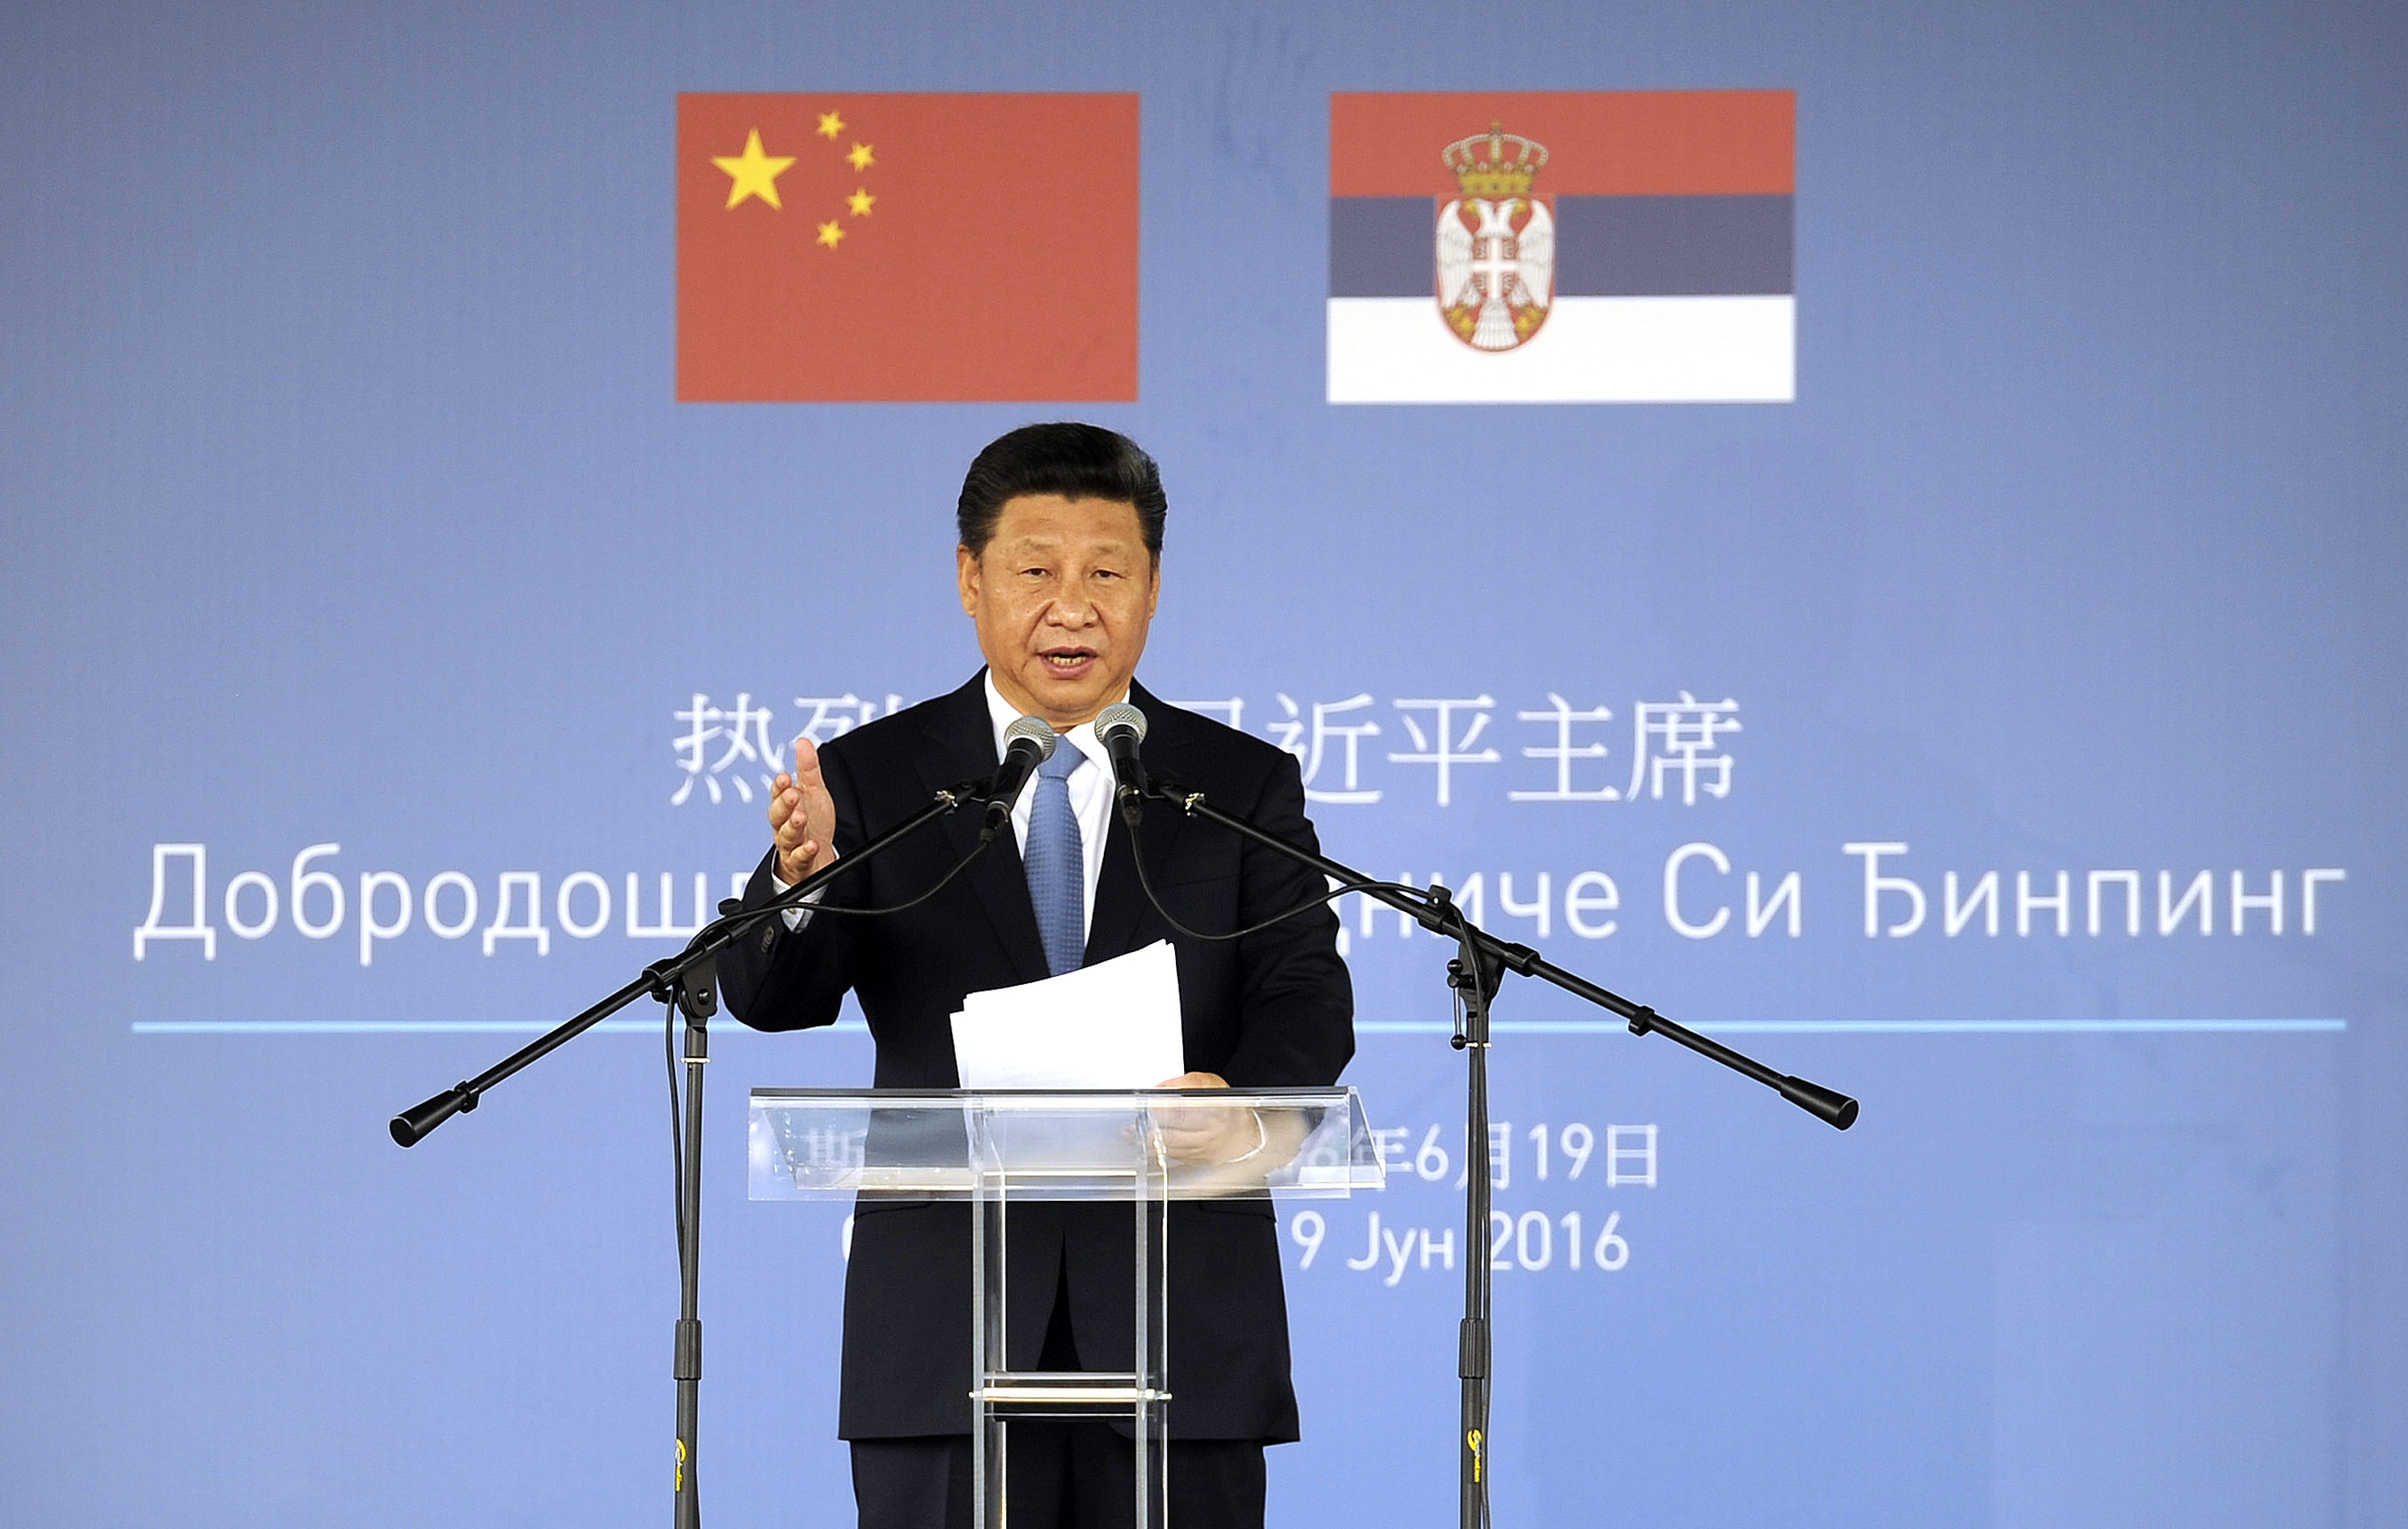 China's President, Xi Jinping delivers a speech during a tour of the Zelezara Smederevo steel plant in Smederevo, Serbia, on June 19, 2016. Chinese President Xi Jinping on June 18 backed Serbia's bid to join the European Union during a visit to the country which aims to become a hub for Chinese imports into southeast Europe. Xi's visit comes two months after China's HBIS, the world's third-biggest steel producer, bought Serbia's sole steel mill and largest exporter Zelezara Smederevo for 46 million euros ($52 million).  / AFP PHOTO / STR / OLIVER BUNIC